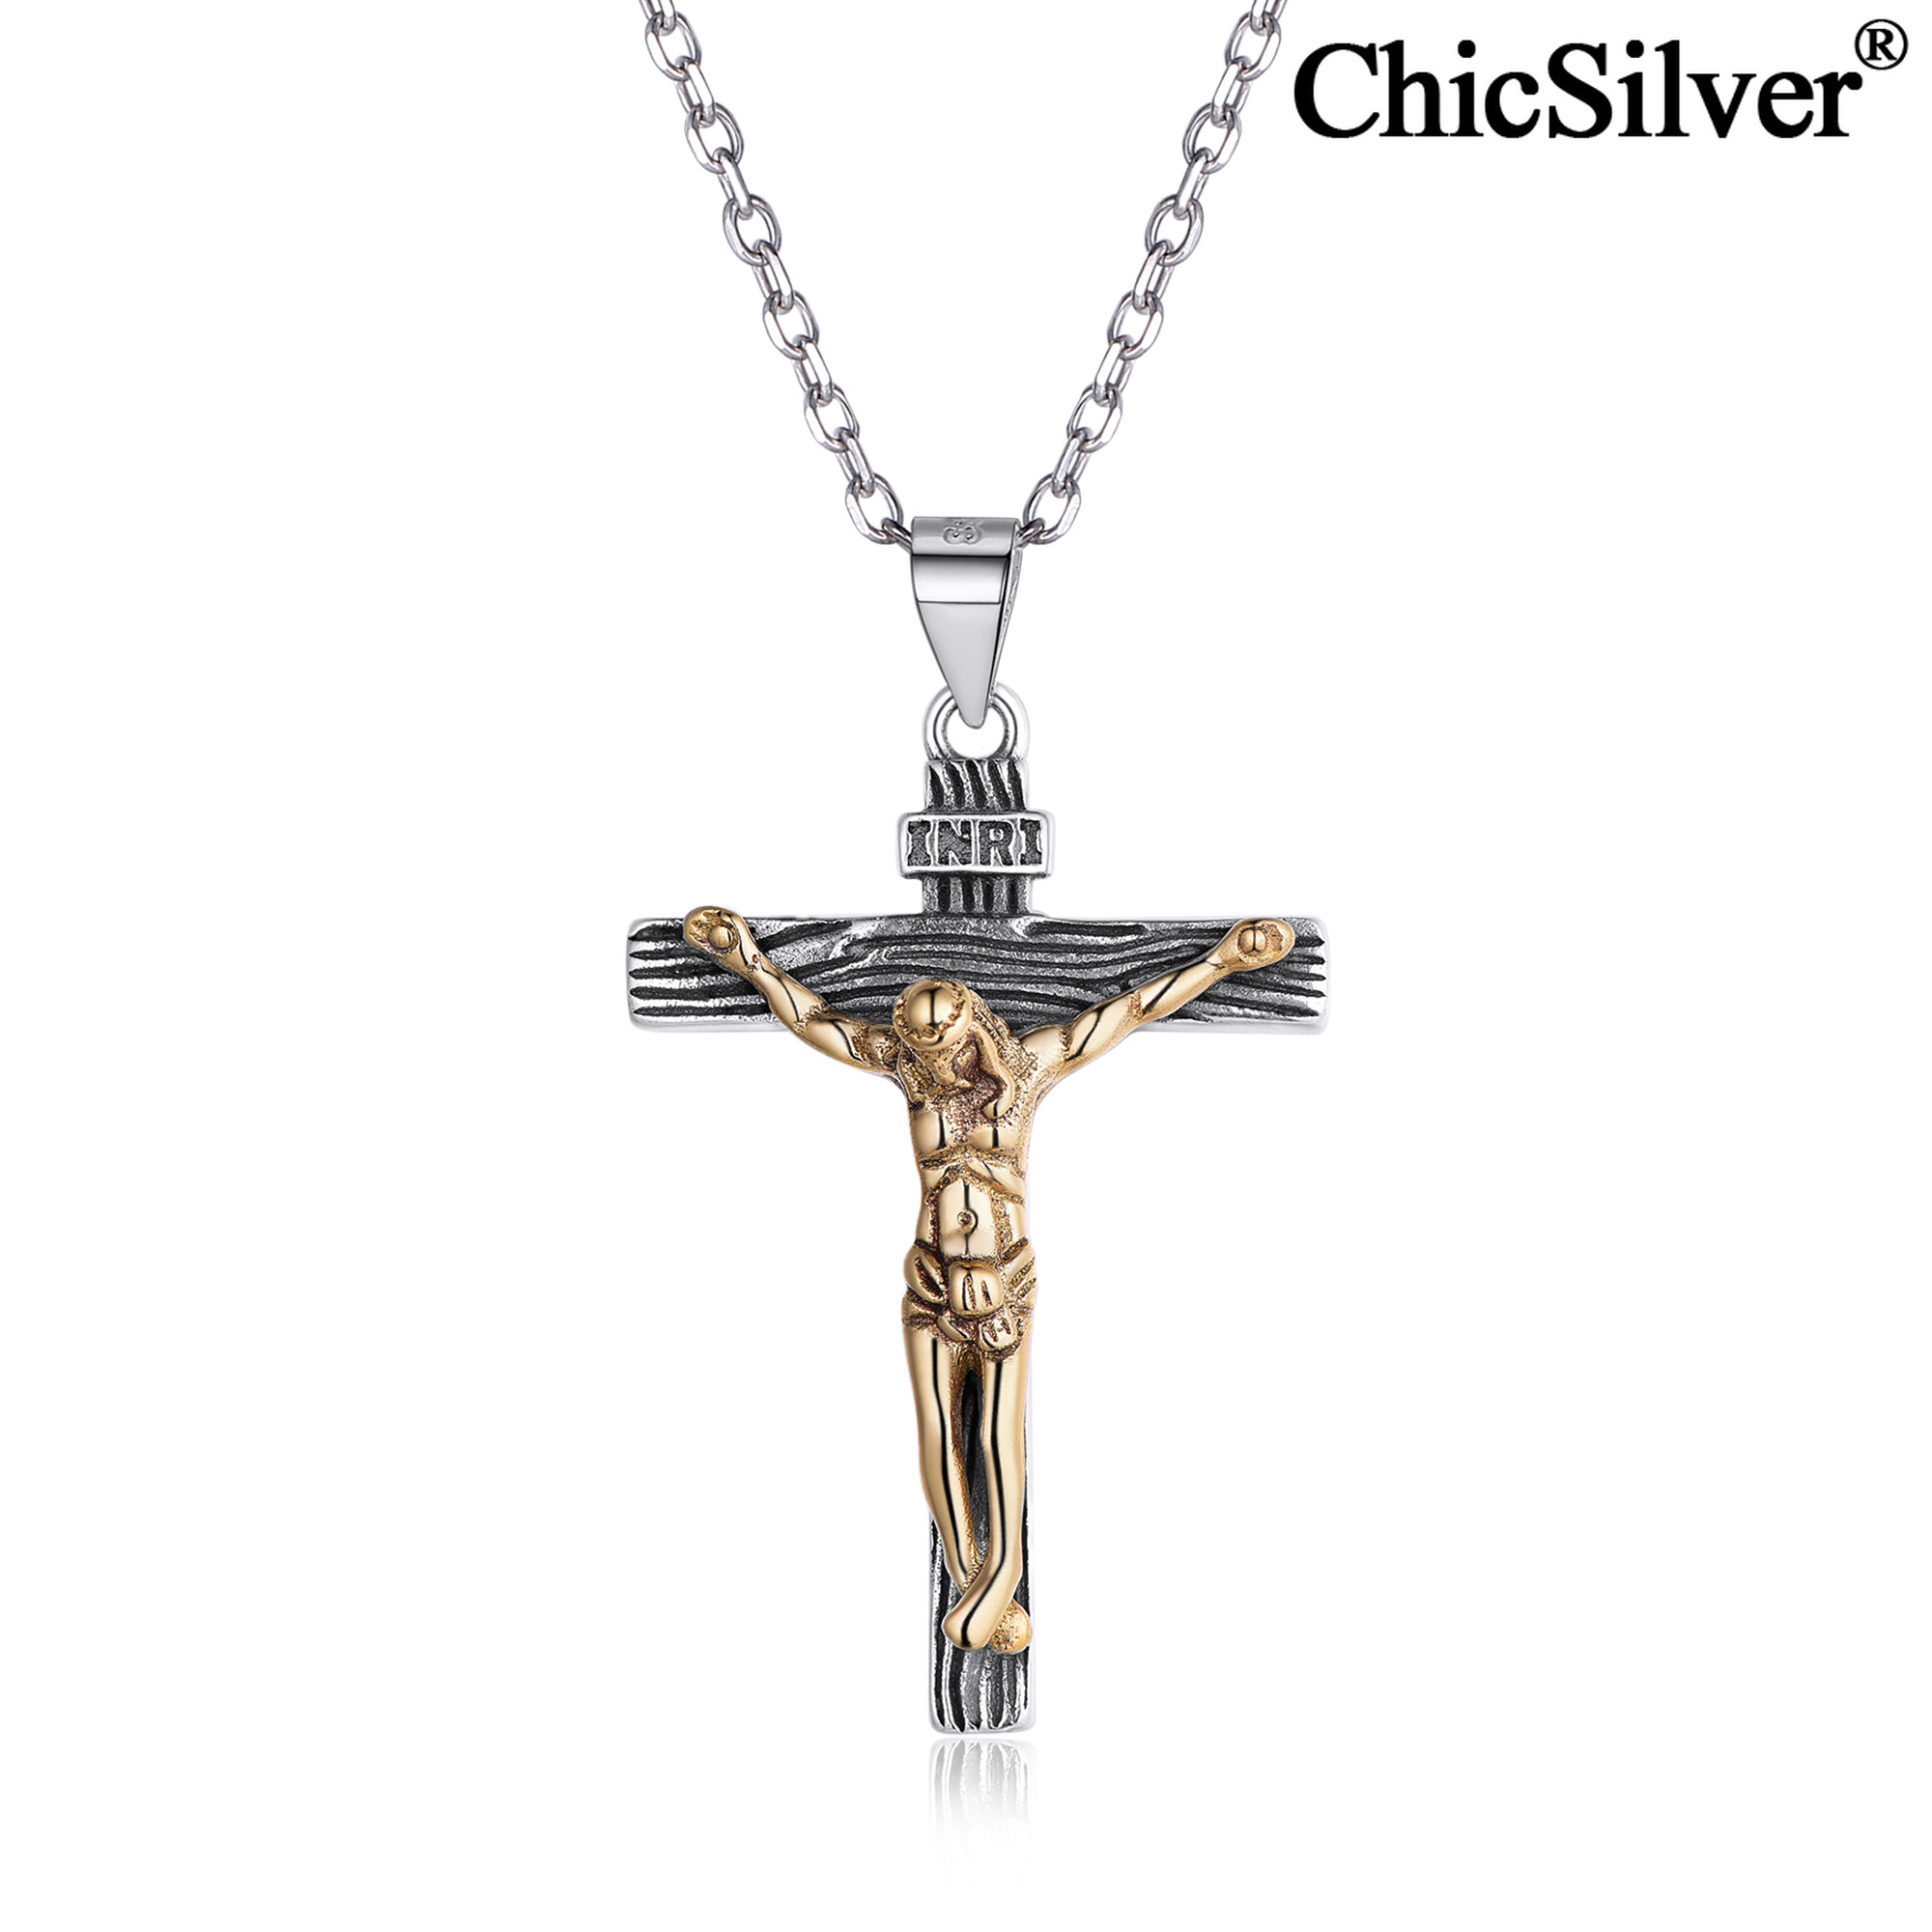 S-L .925 Sterling Silver Linear Cross INRI Crucifix Charm Pendant Religious Jewelry Choice of Size 